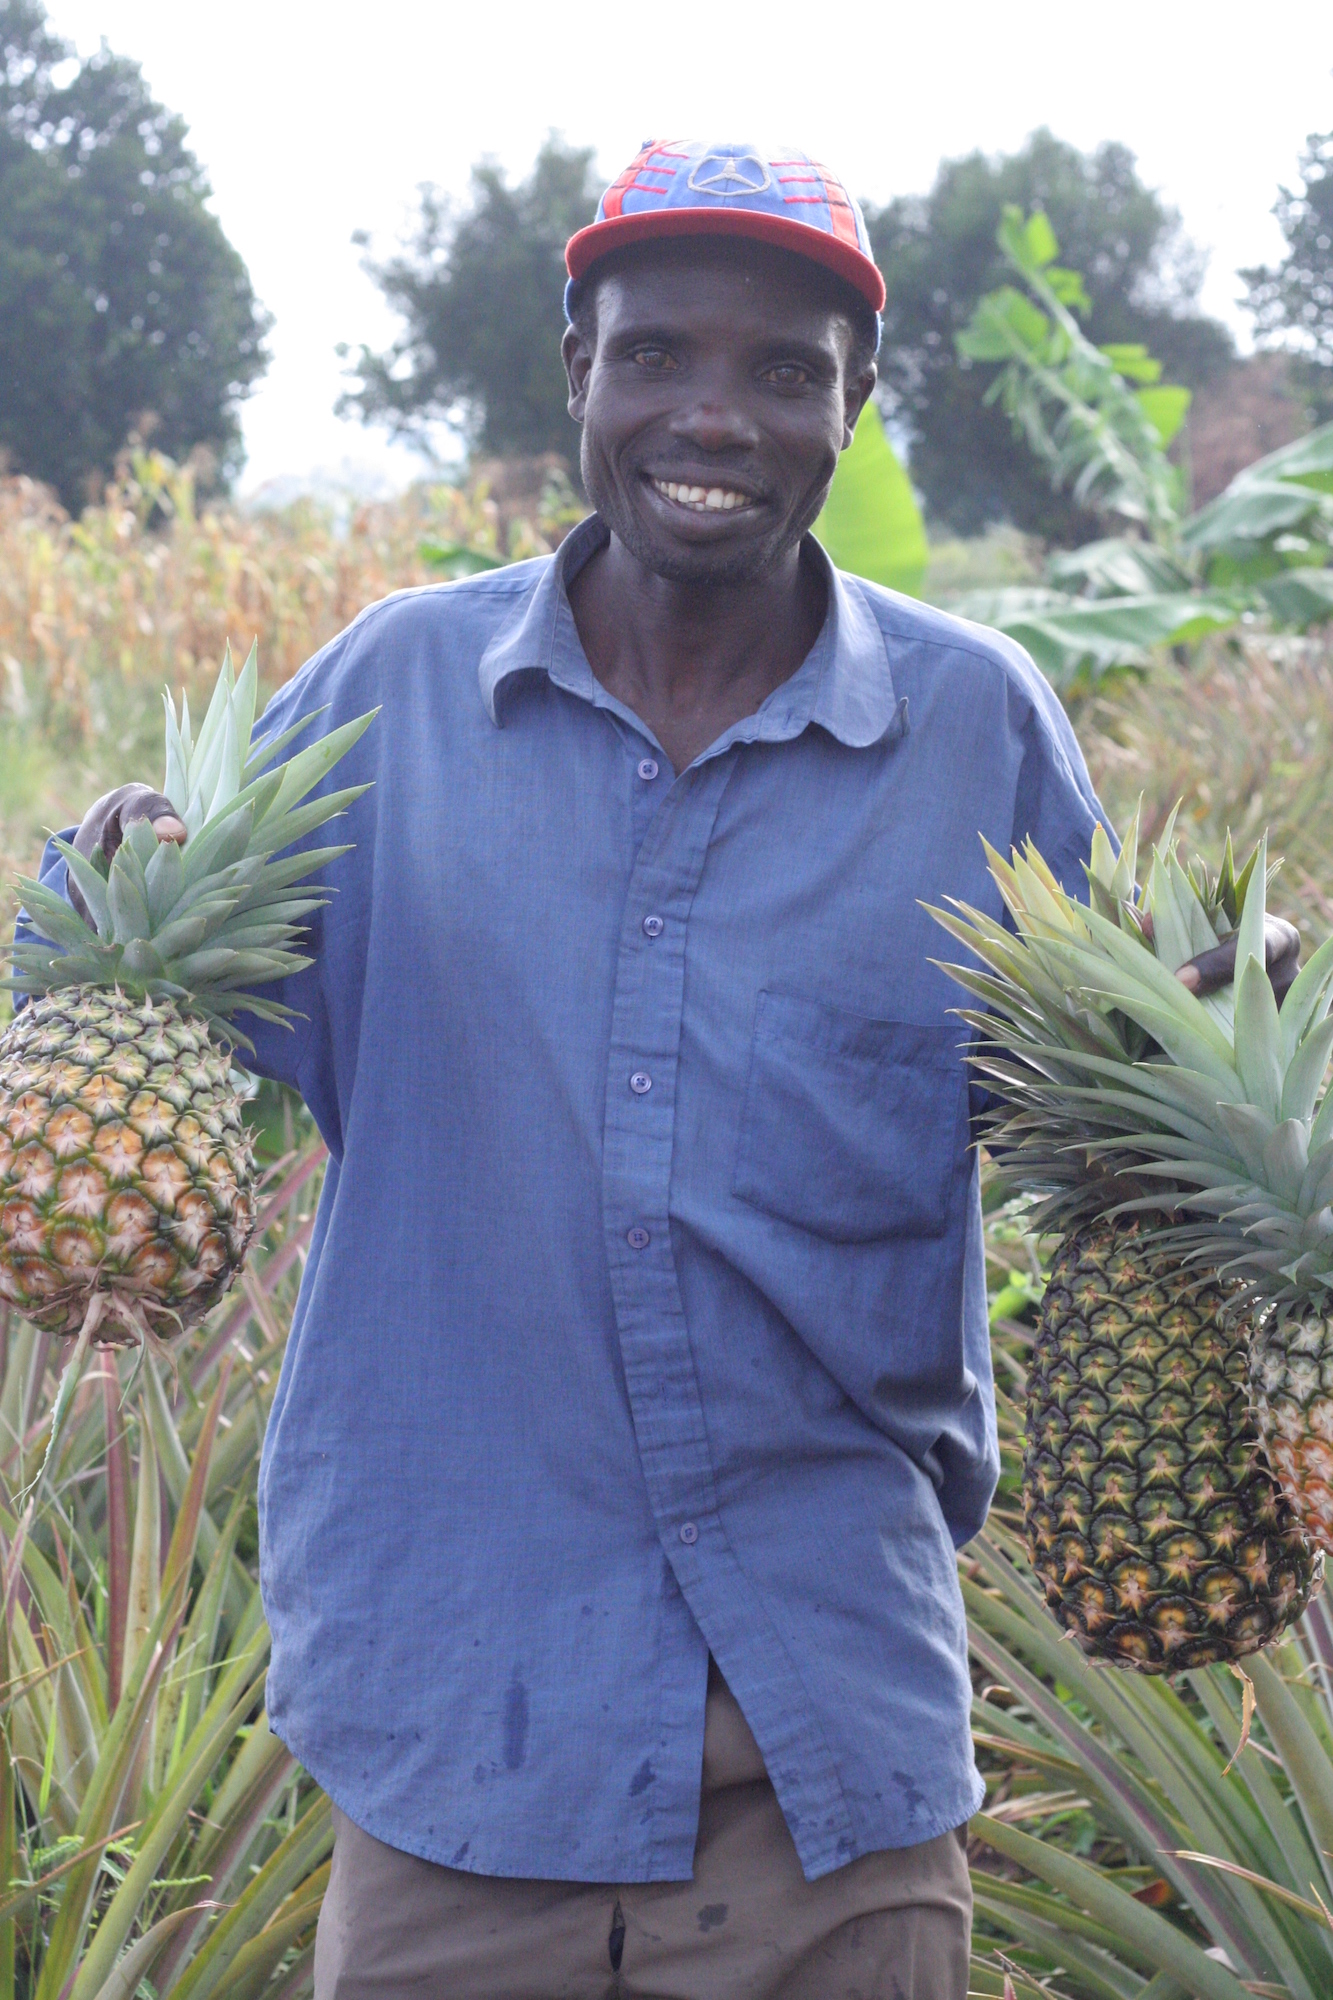 Man smiling with pineapples in his hands